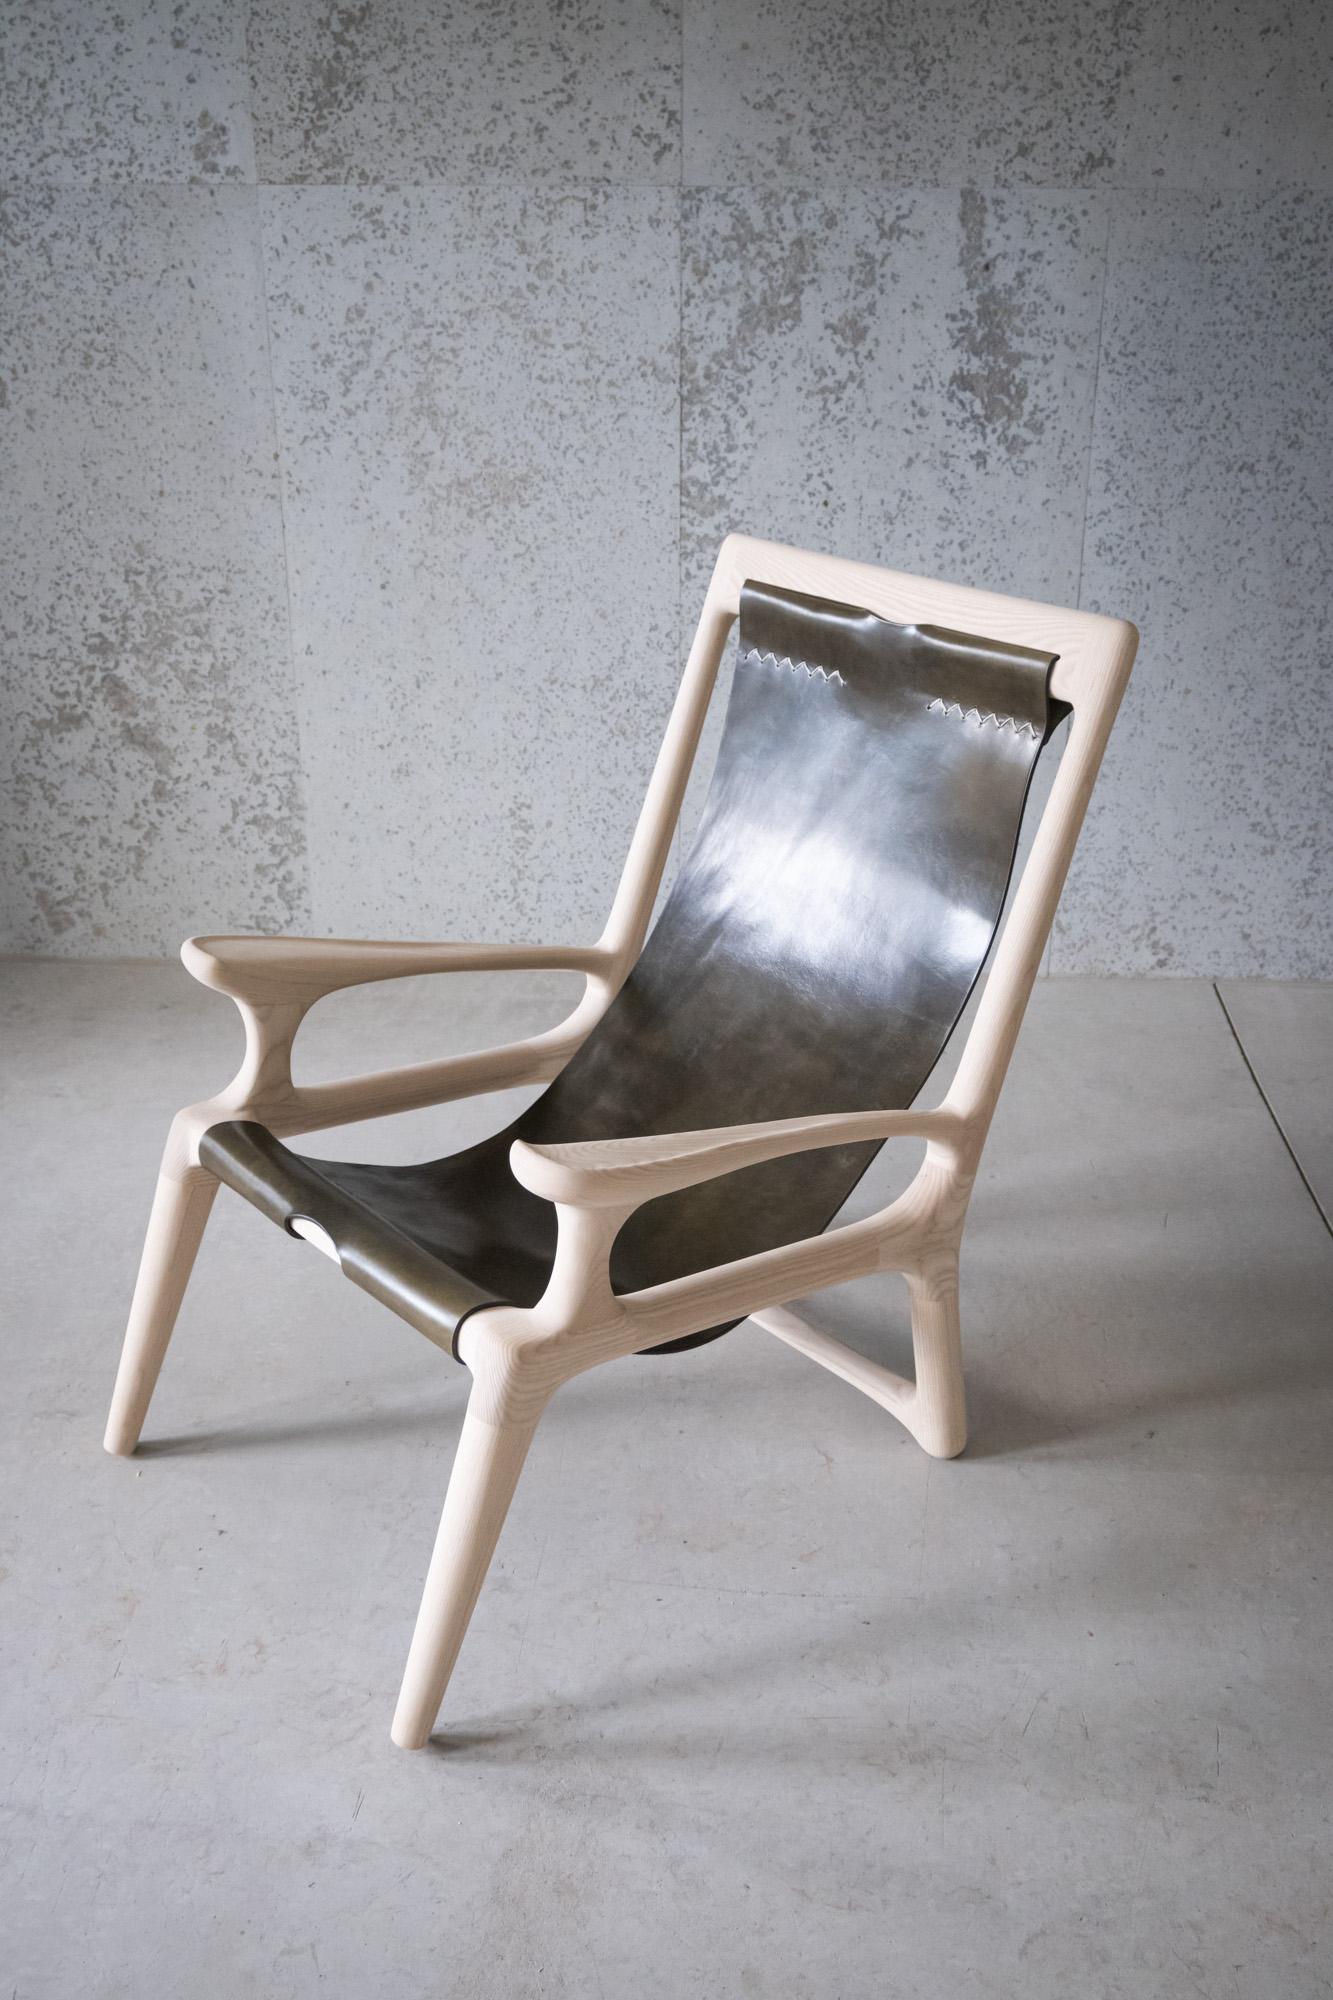 This chair is exactly the same as our Classic sling chair with one exception: the arms connect to the back supports. This listing includes one chair.

This award-winning leather and wood sling chair is the inaugural piece designed by Fernweh